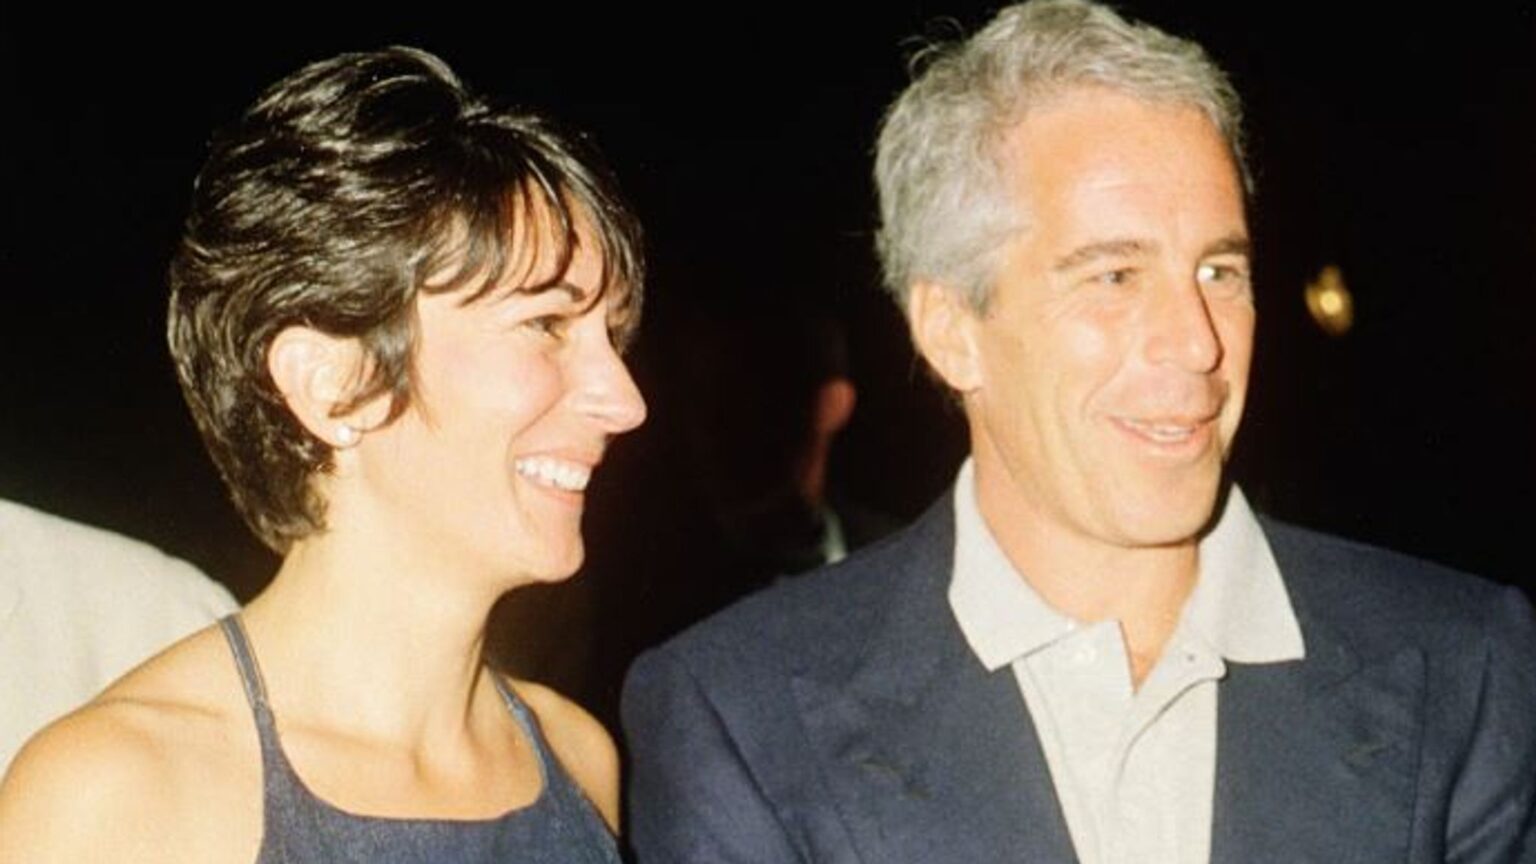 A judge made a statement implying Ghislaine Maxwell is a victim of Jeffrey Epstein. But how true is her statement?